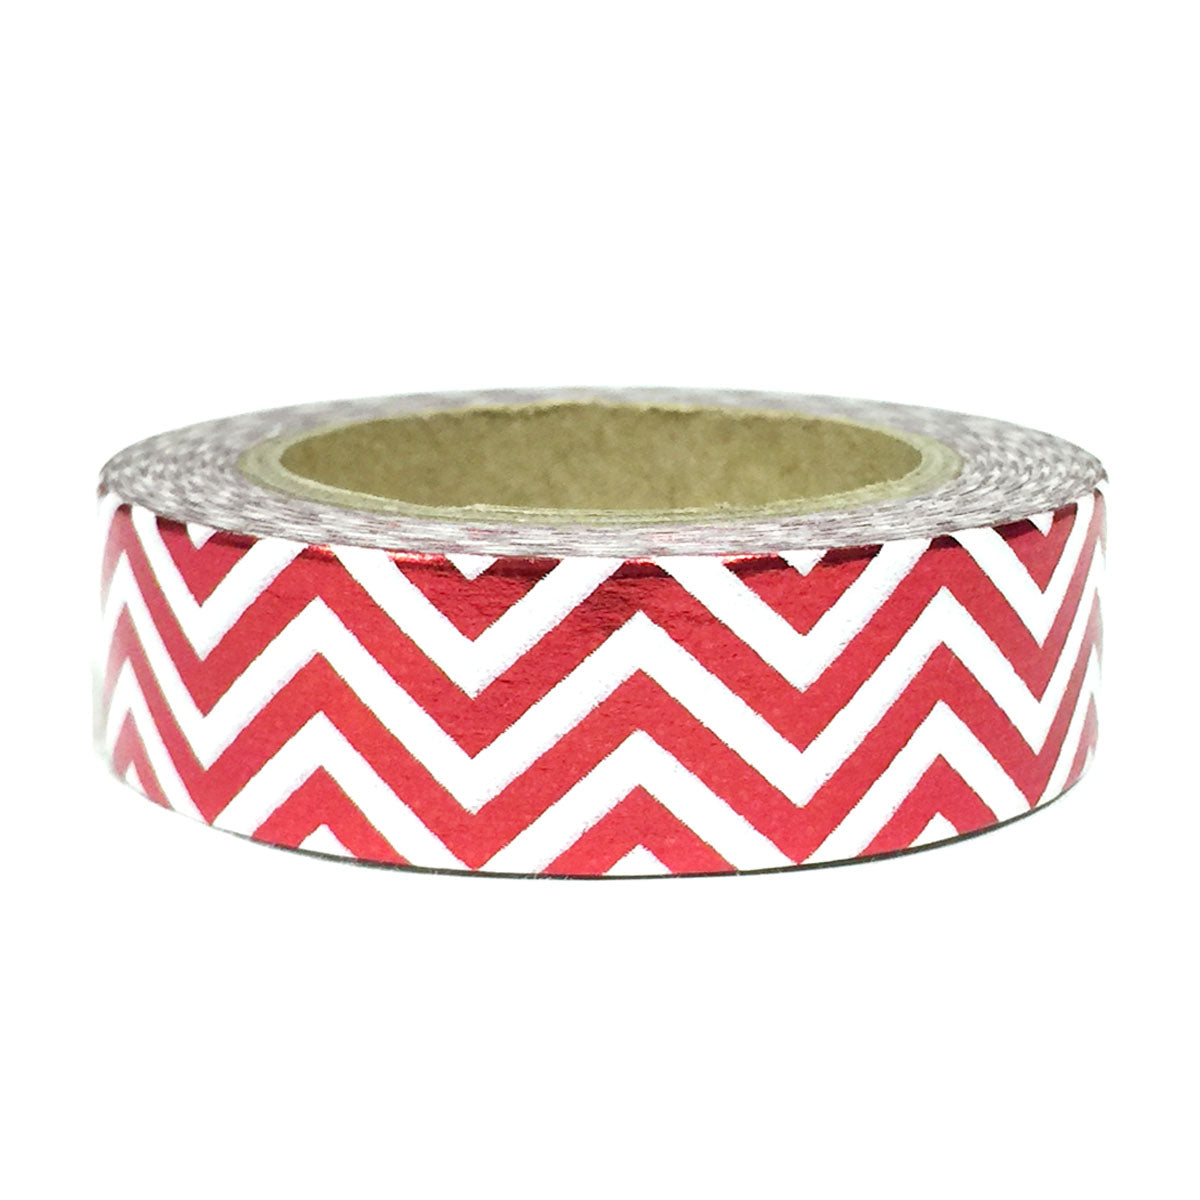 Wrapables Washi Masking Tape, Fun and Lively Group